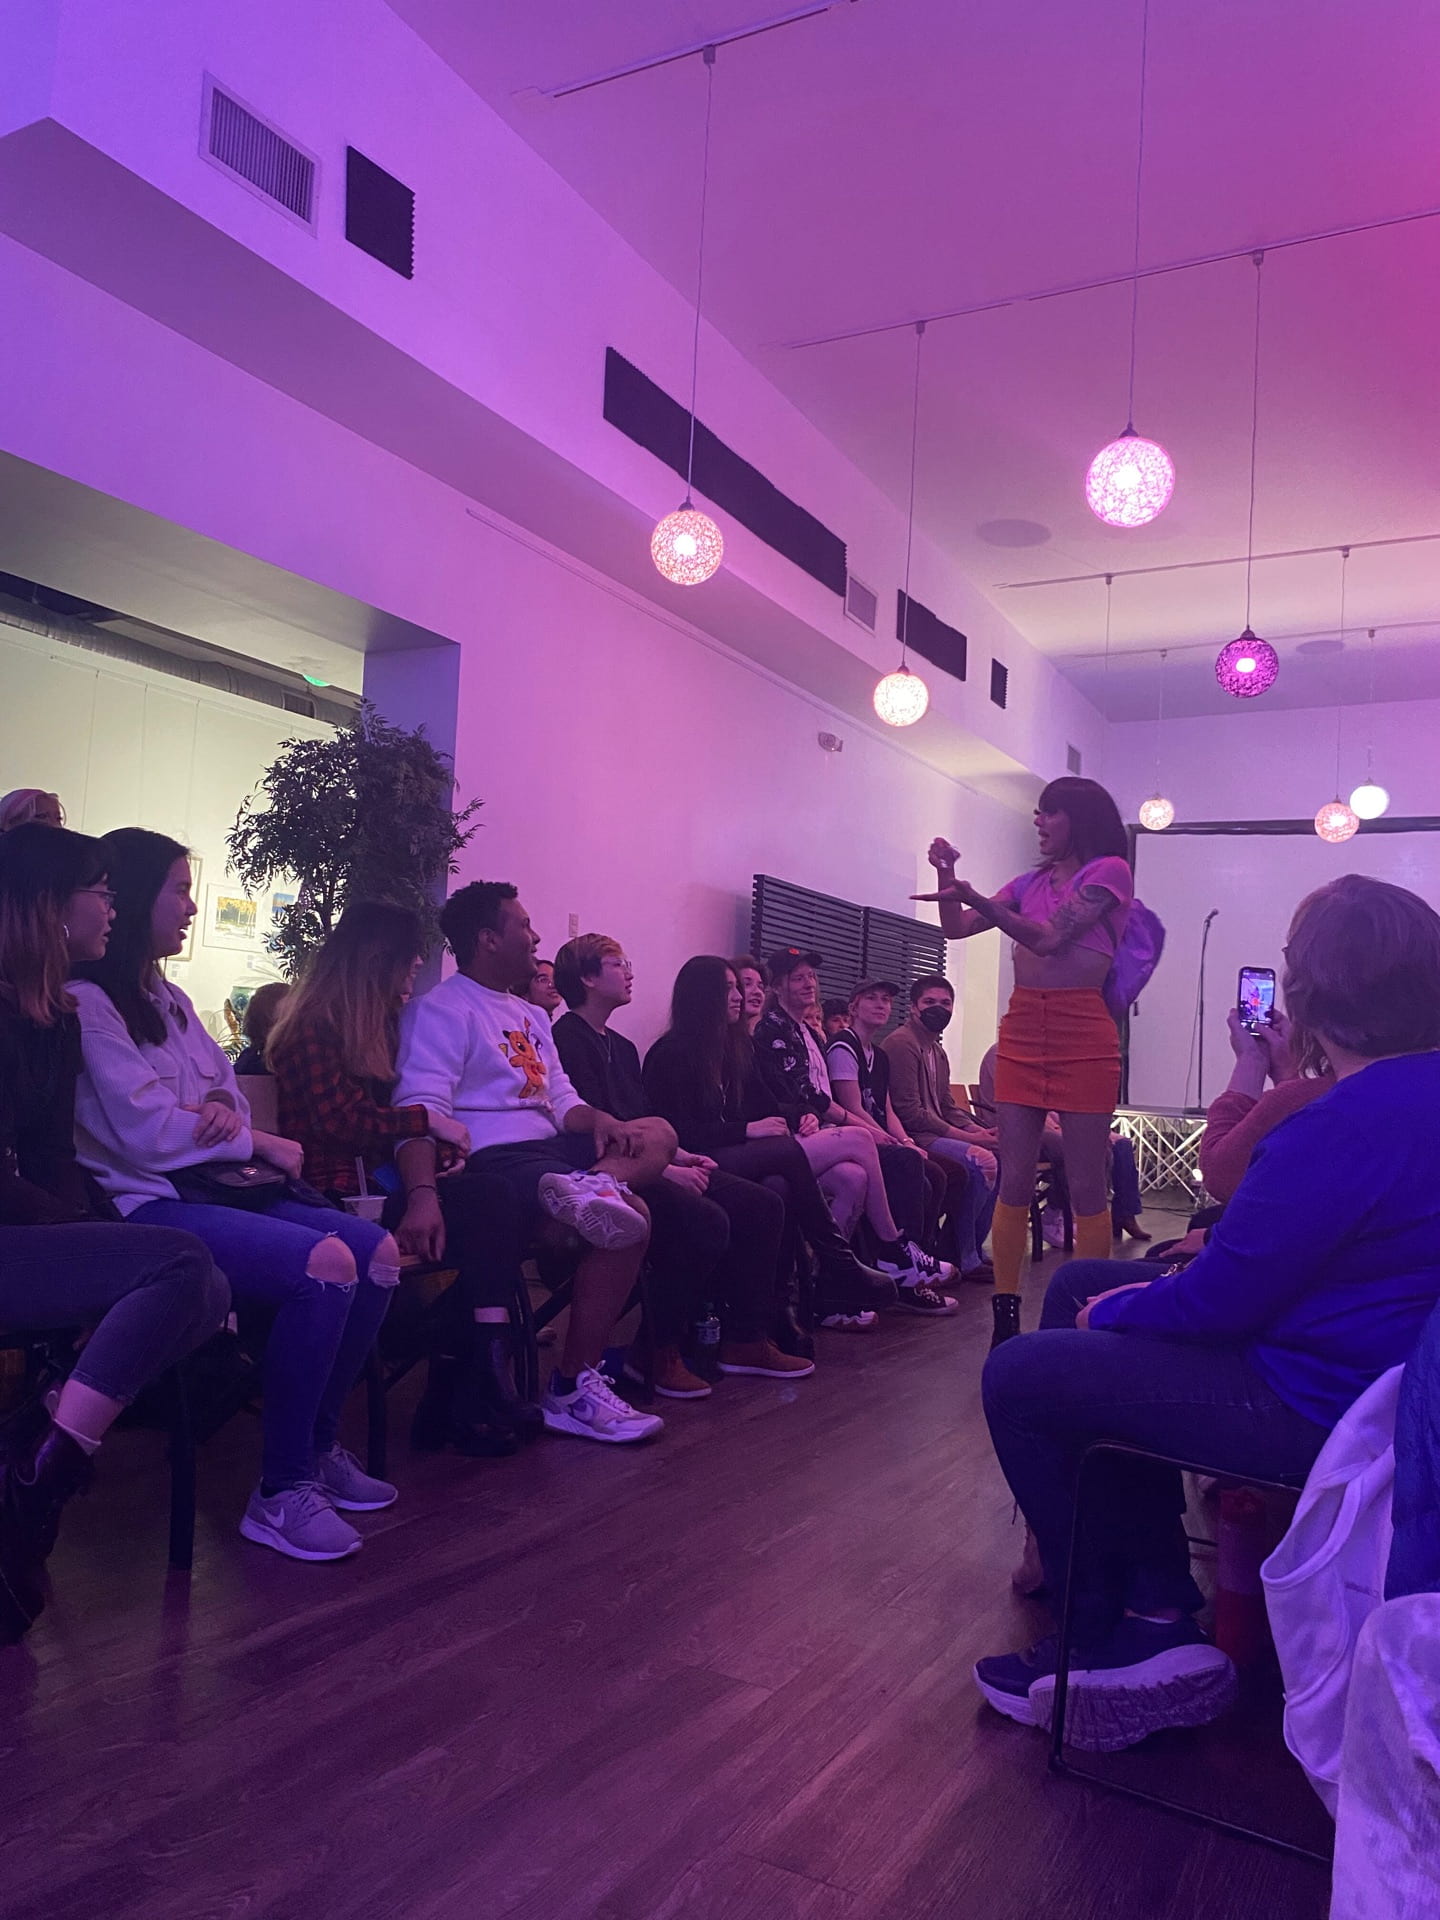 drag queen in an orange skirt stands I purple lit room interacting with seated crowd